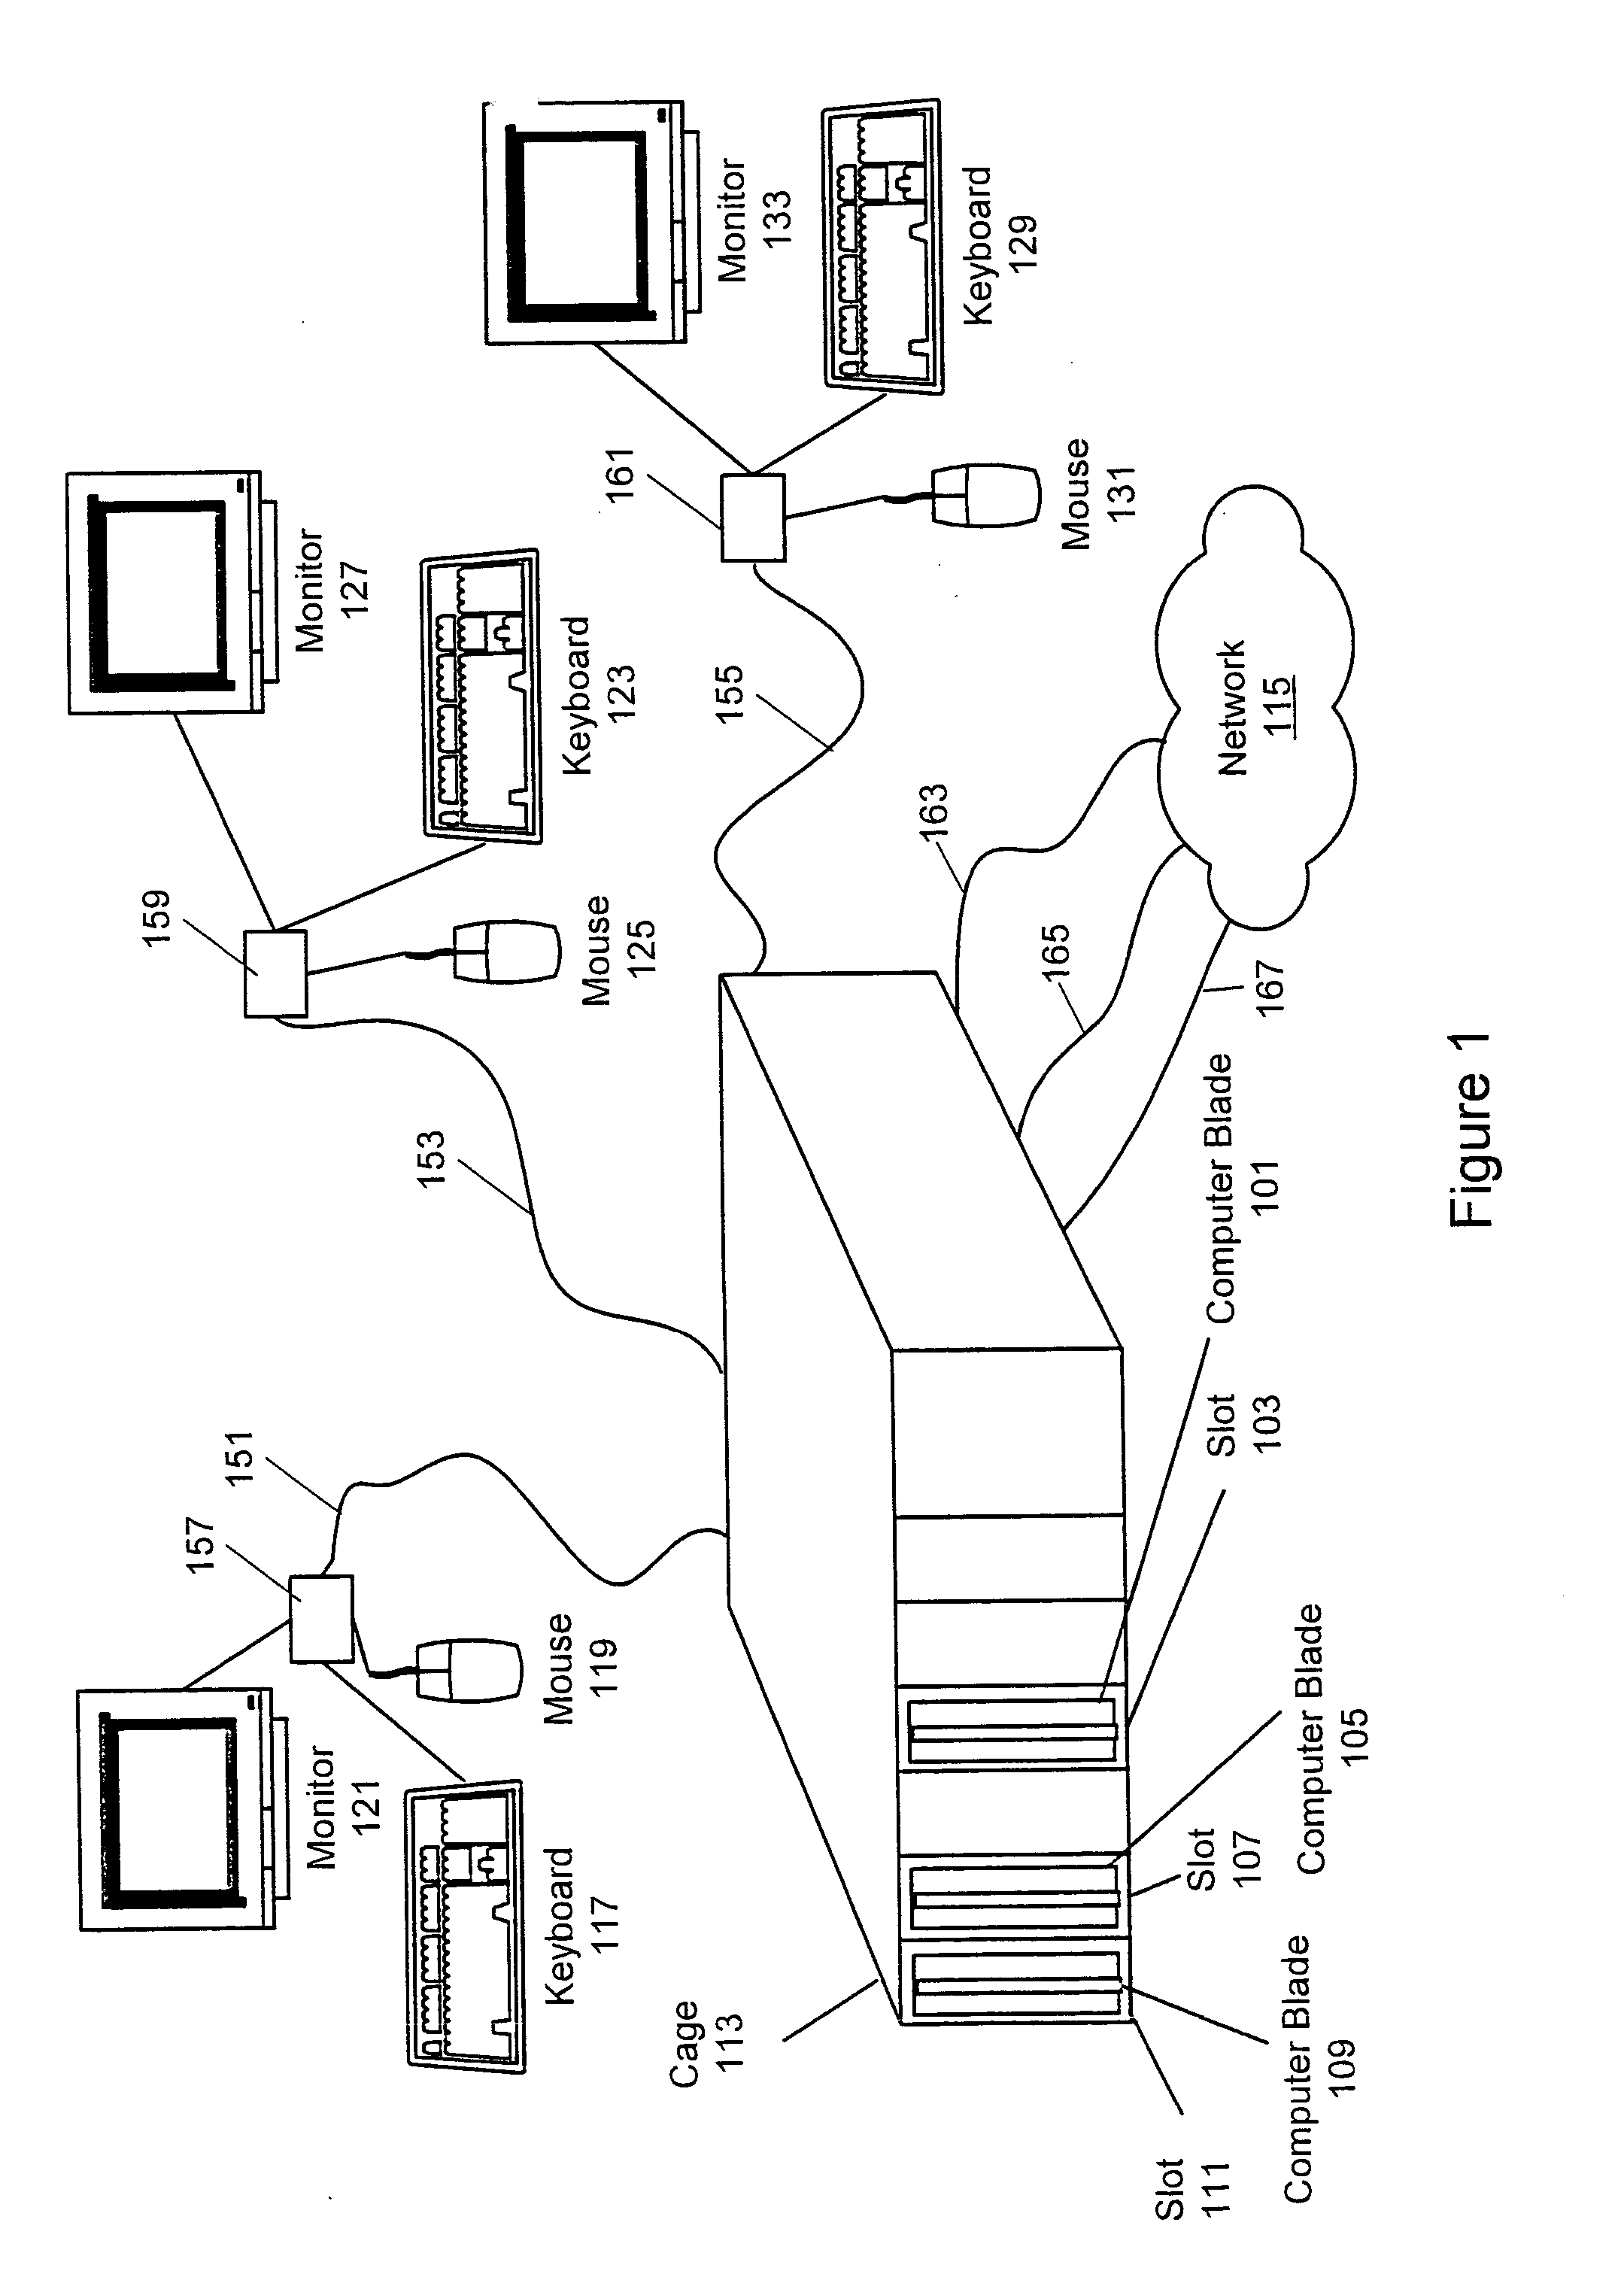 System and method for automatic software retrieval on a peer-to-peer network